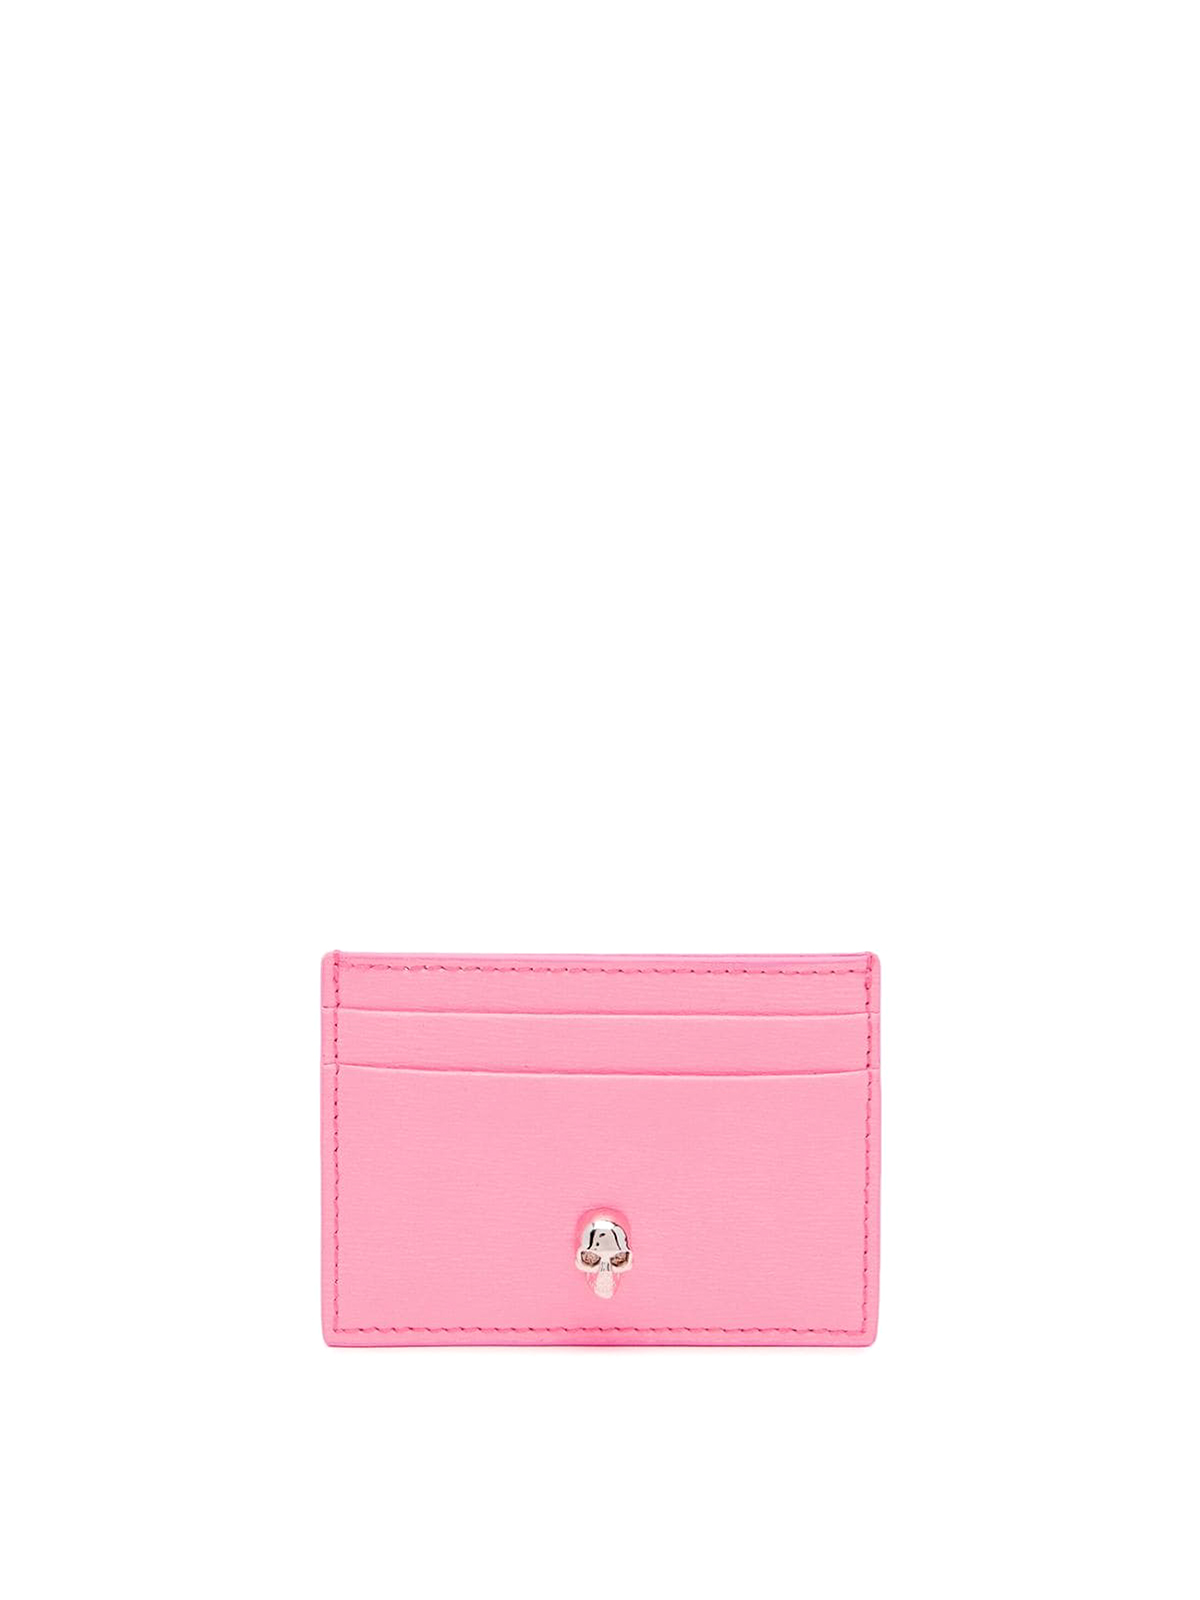 Alexander Mcqueen Skull Leather Credit Card Case In Pink